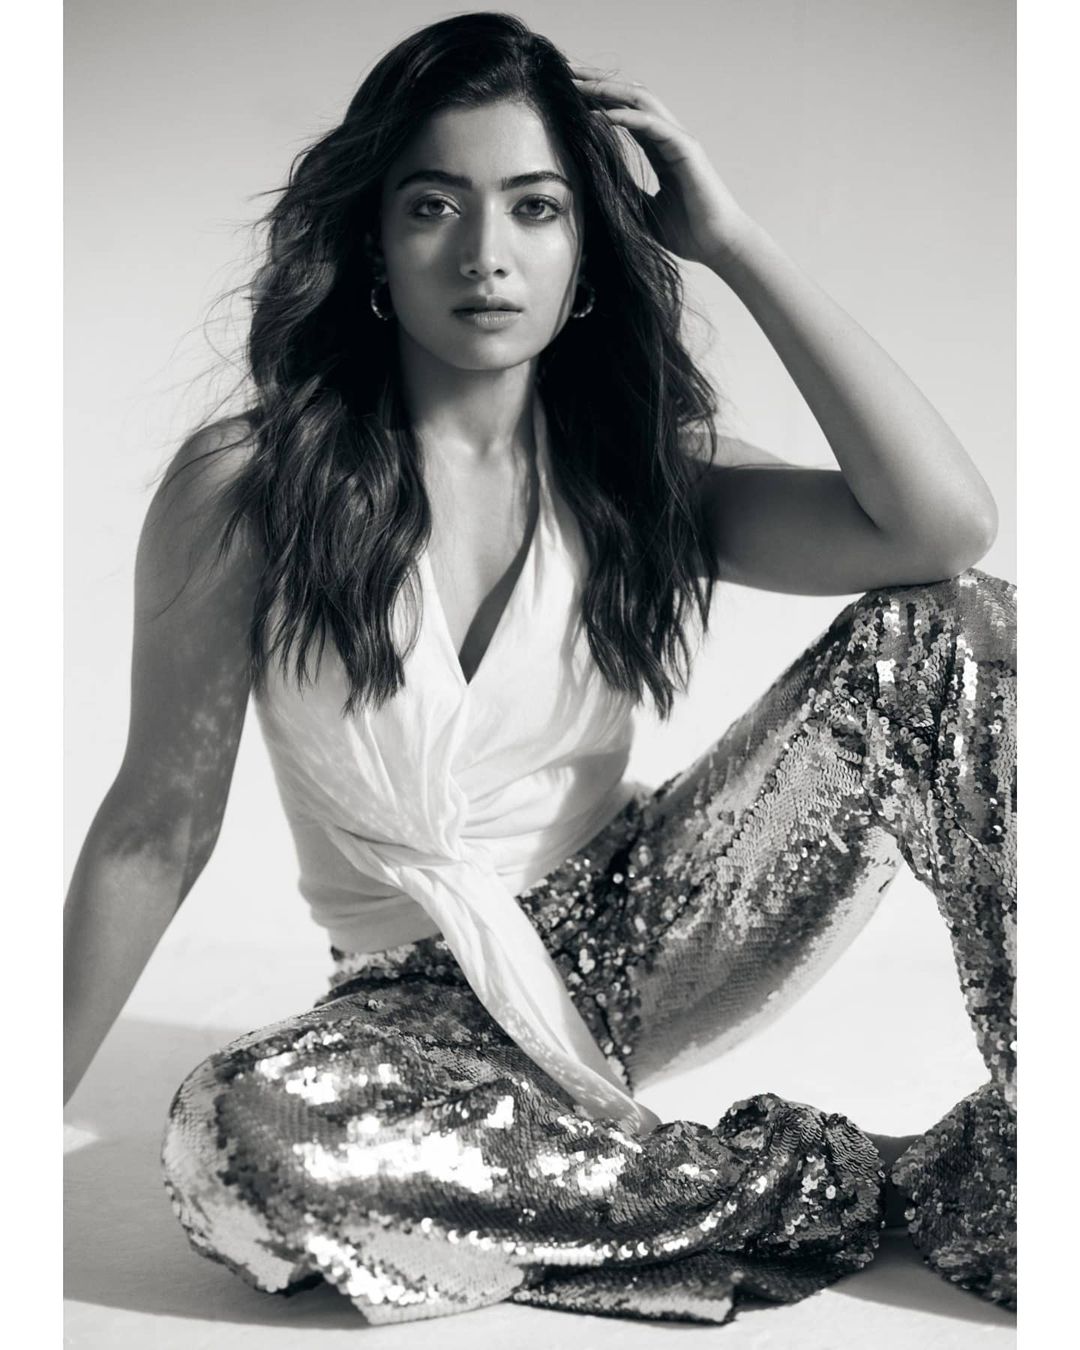 Rashmika Mandanna looks stunning in the tie-up top and sequinned pants